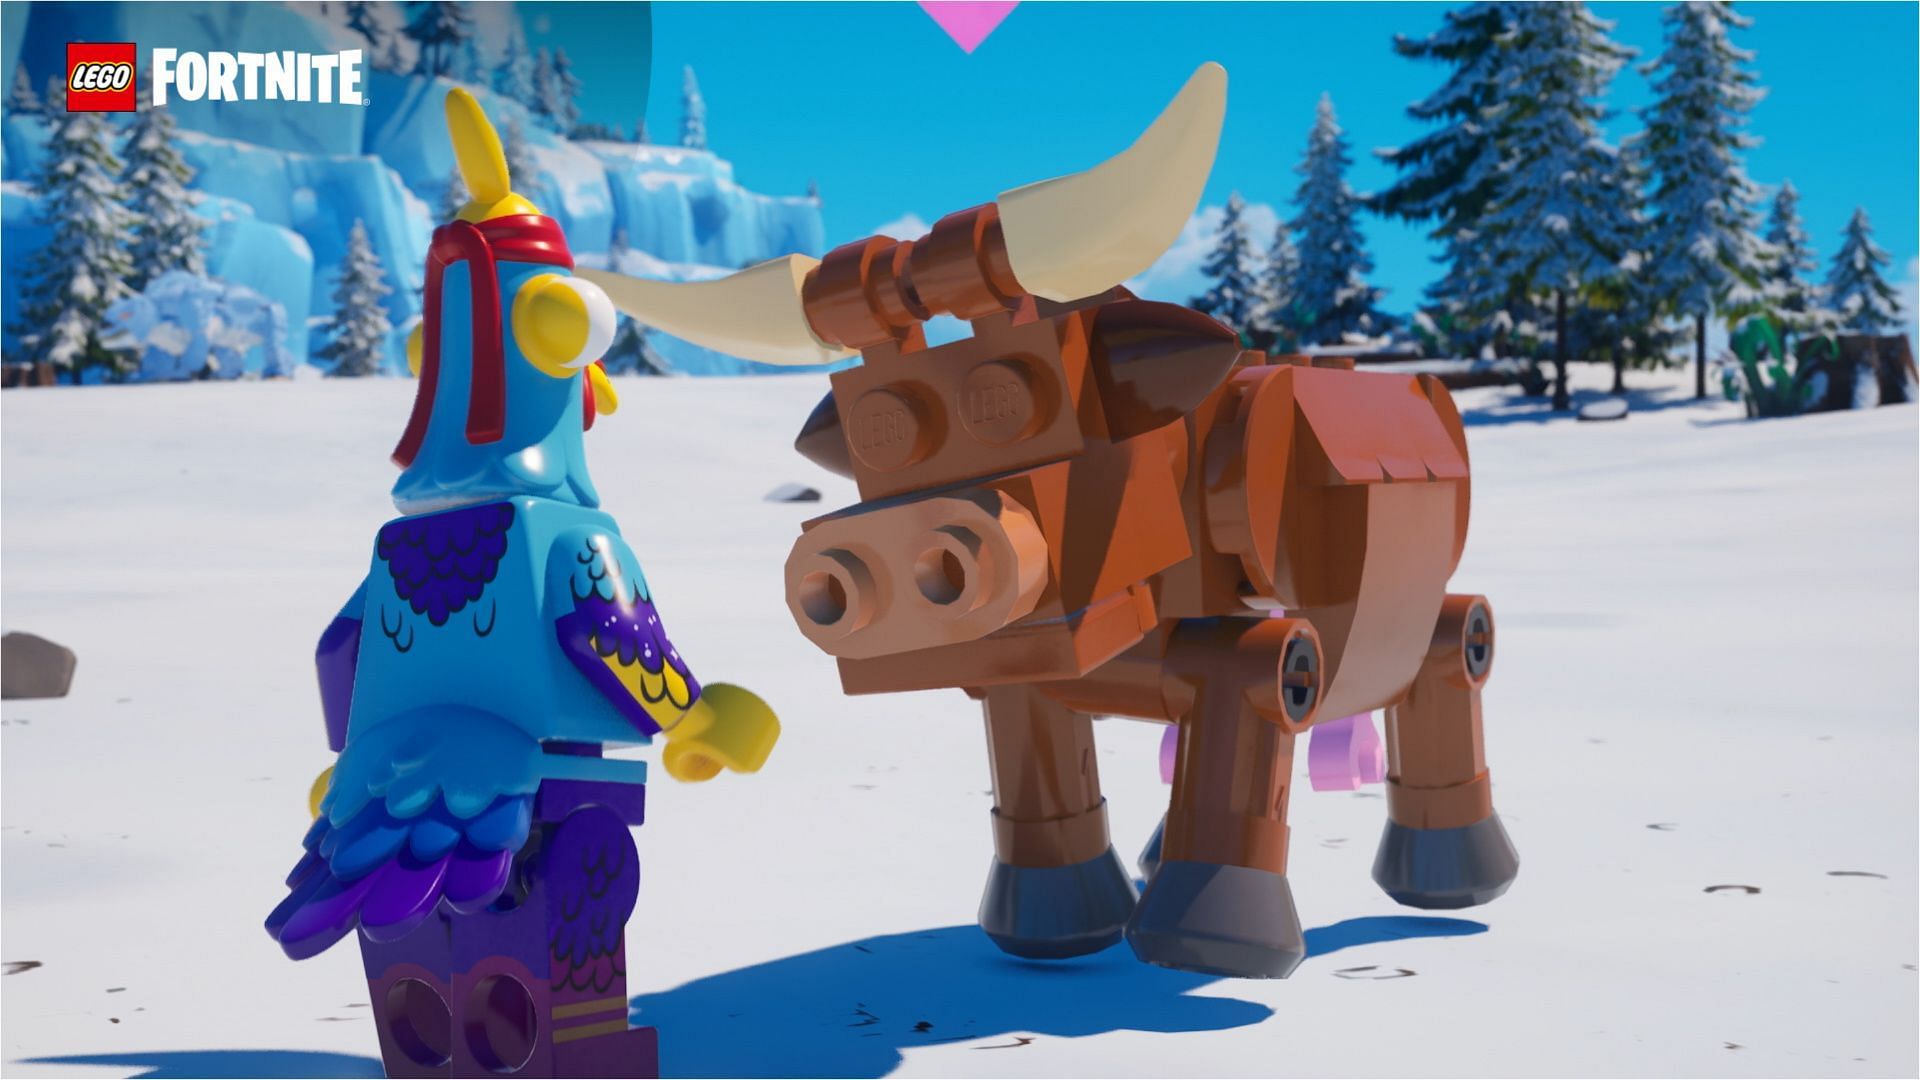 Follow this step to tame and recruit animals in LEGO Fortnite (Image via Epic Games)